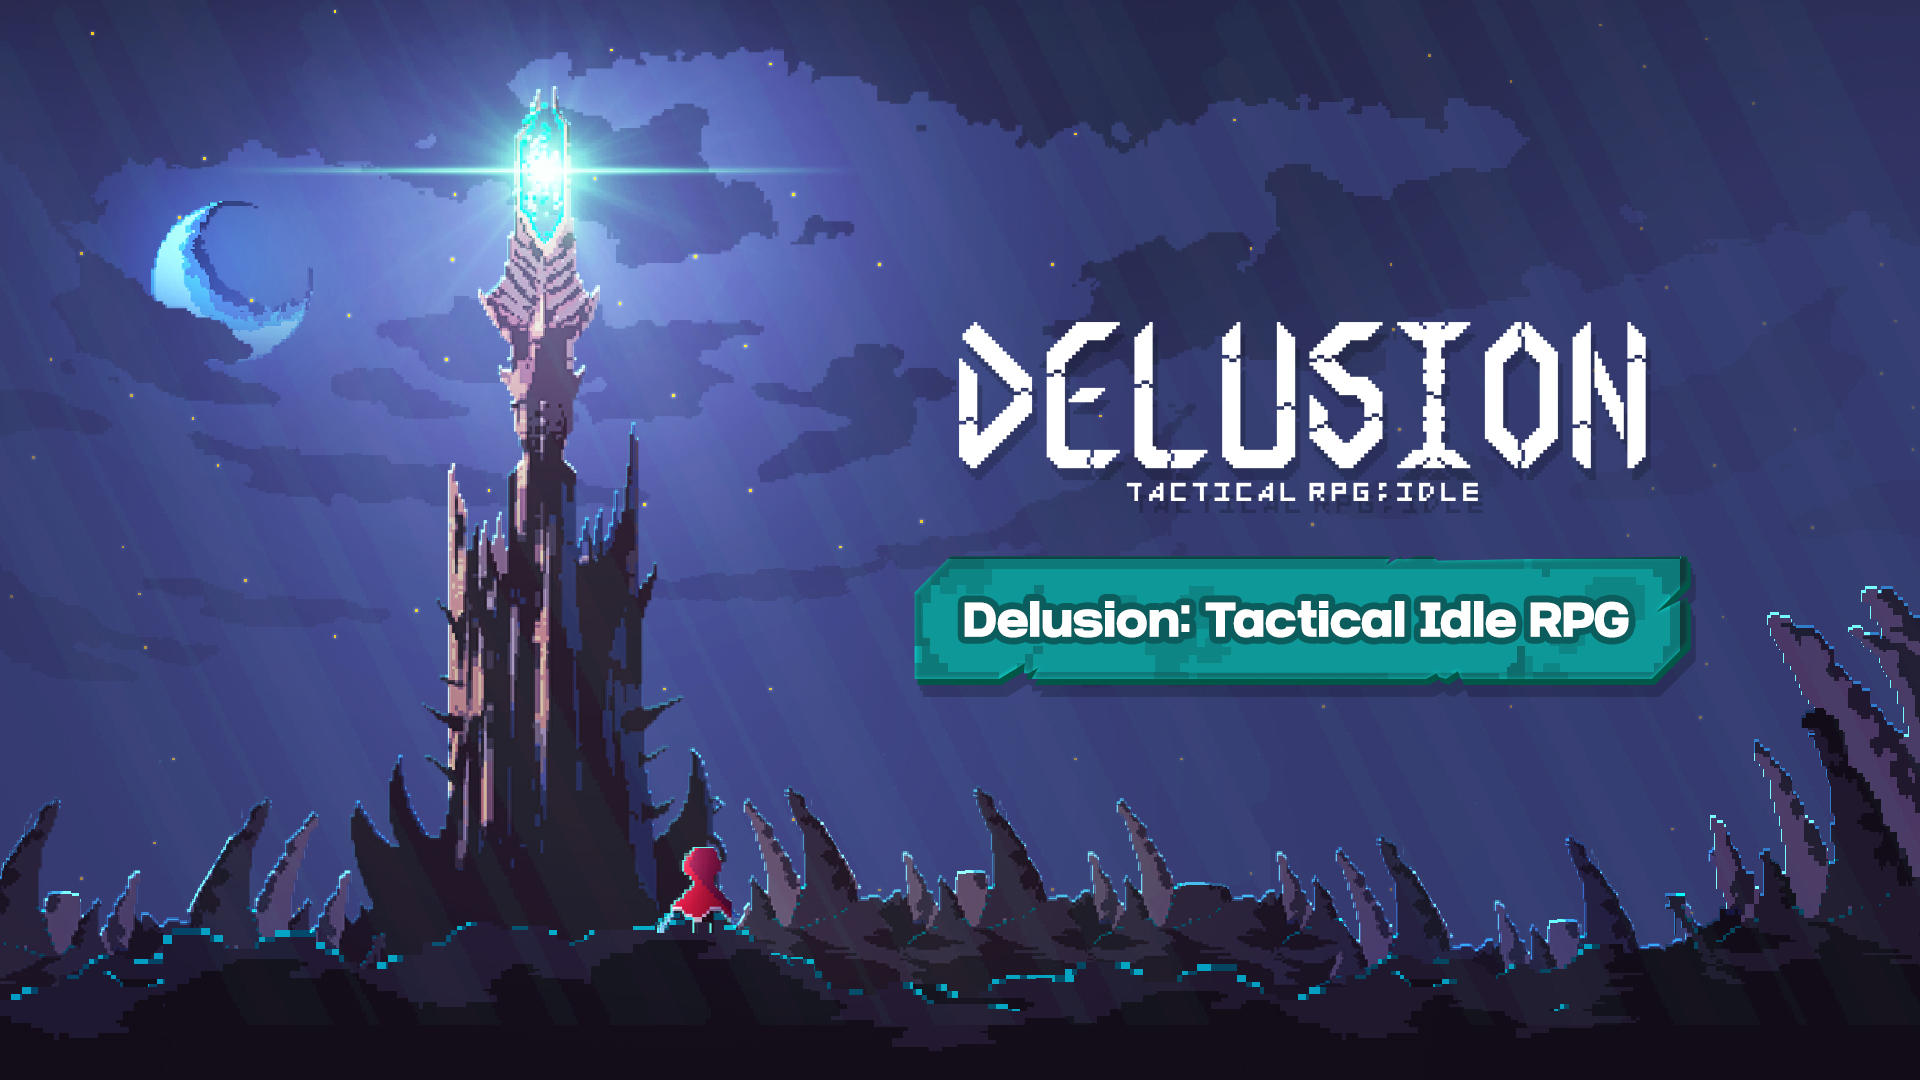 Screenshot 1 of Delusion: Tactical Idle RPG 1.0.24